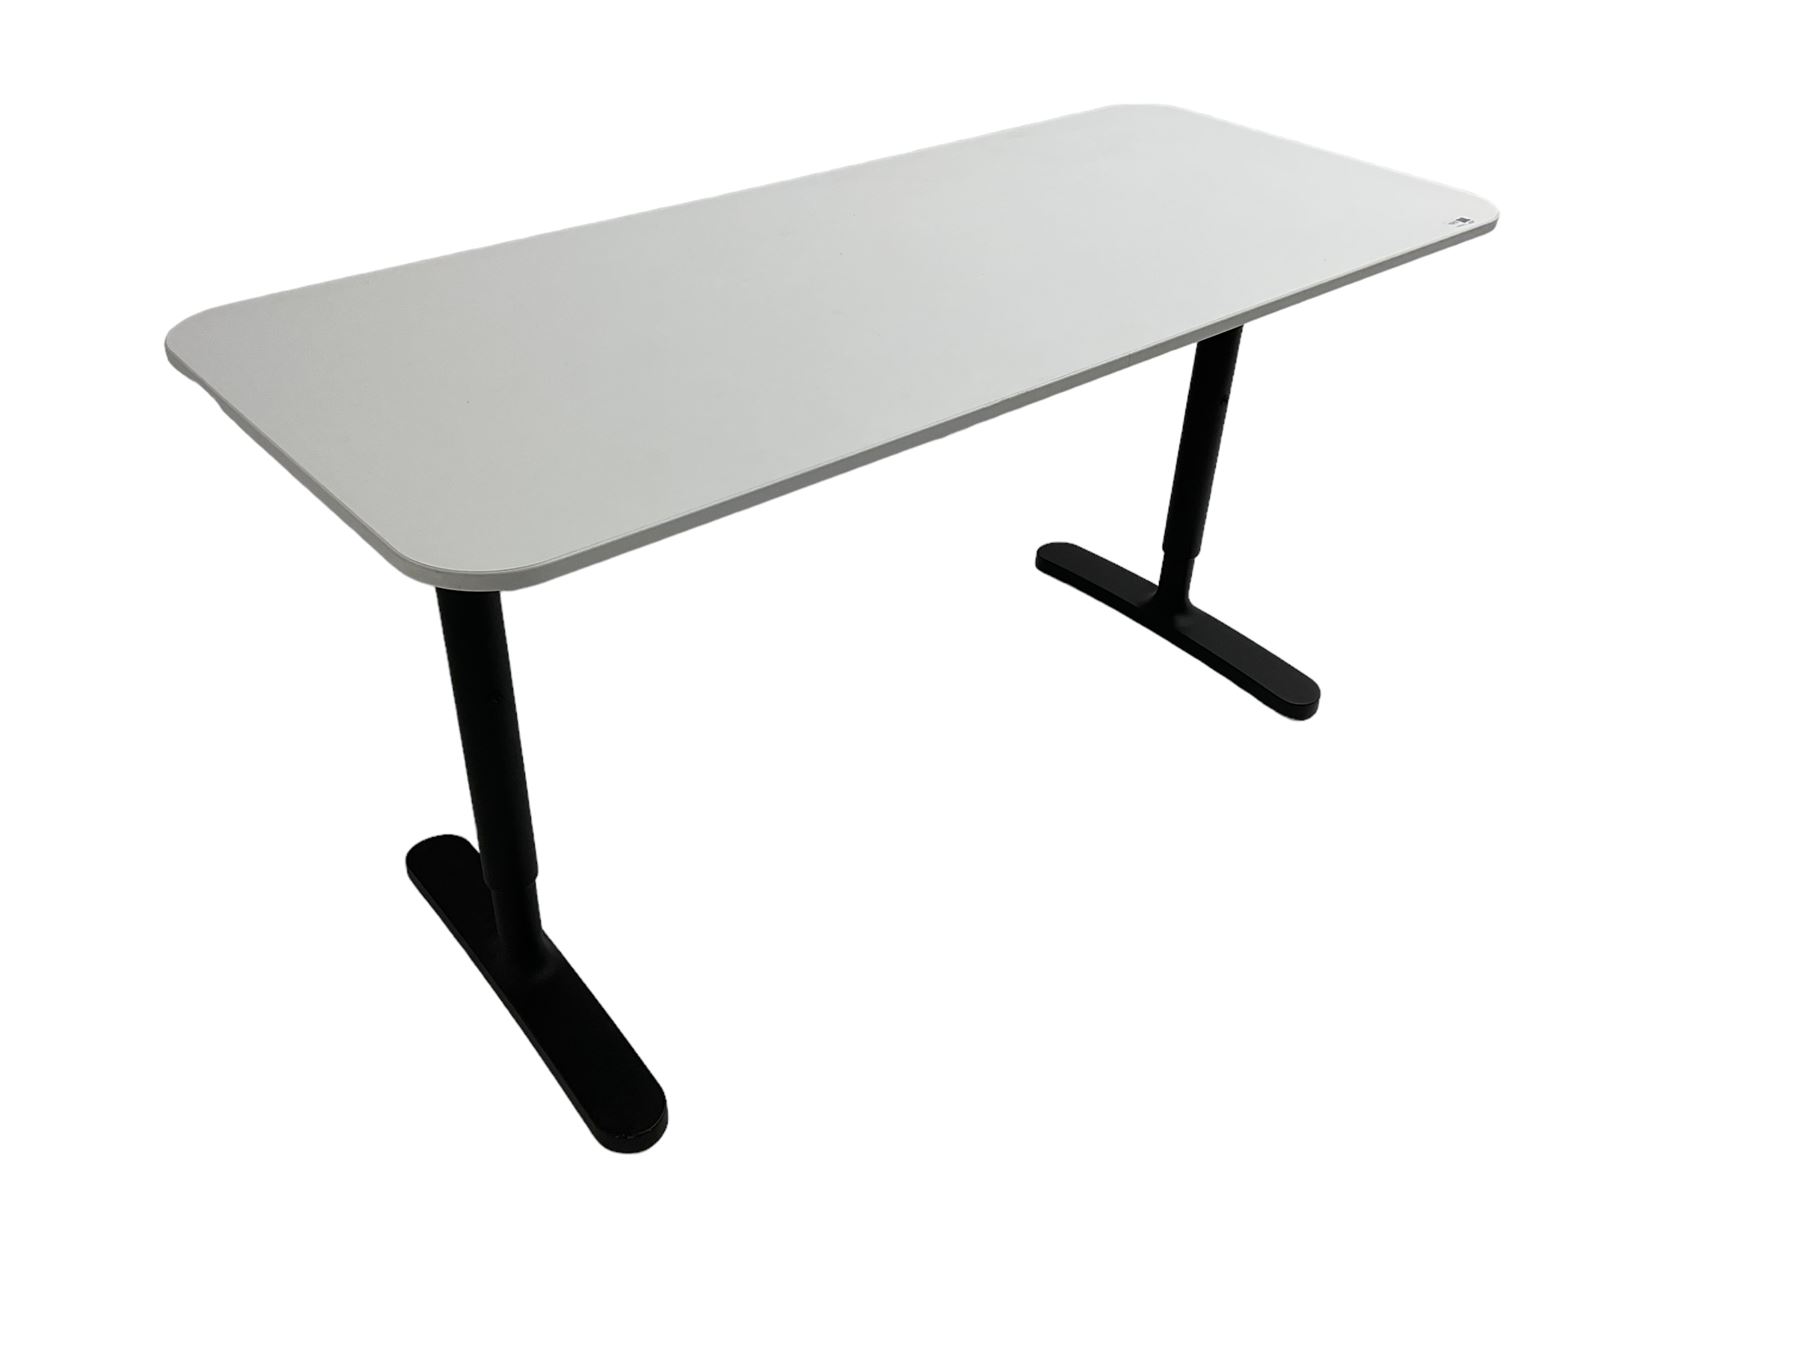 IKEA - contemporary table with white finish top - Image 6 of 6